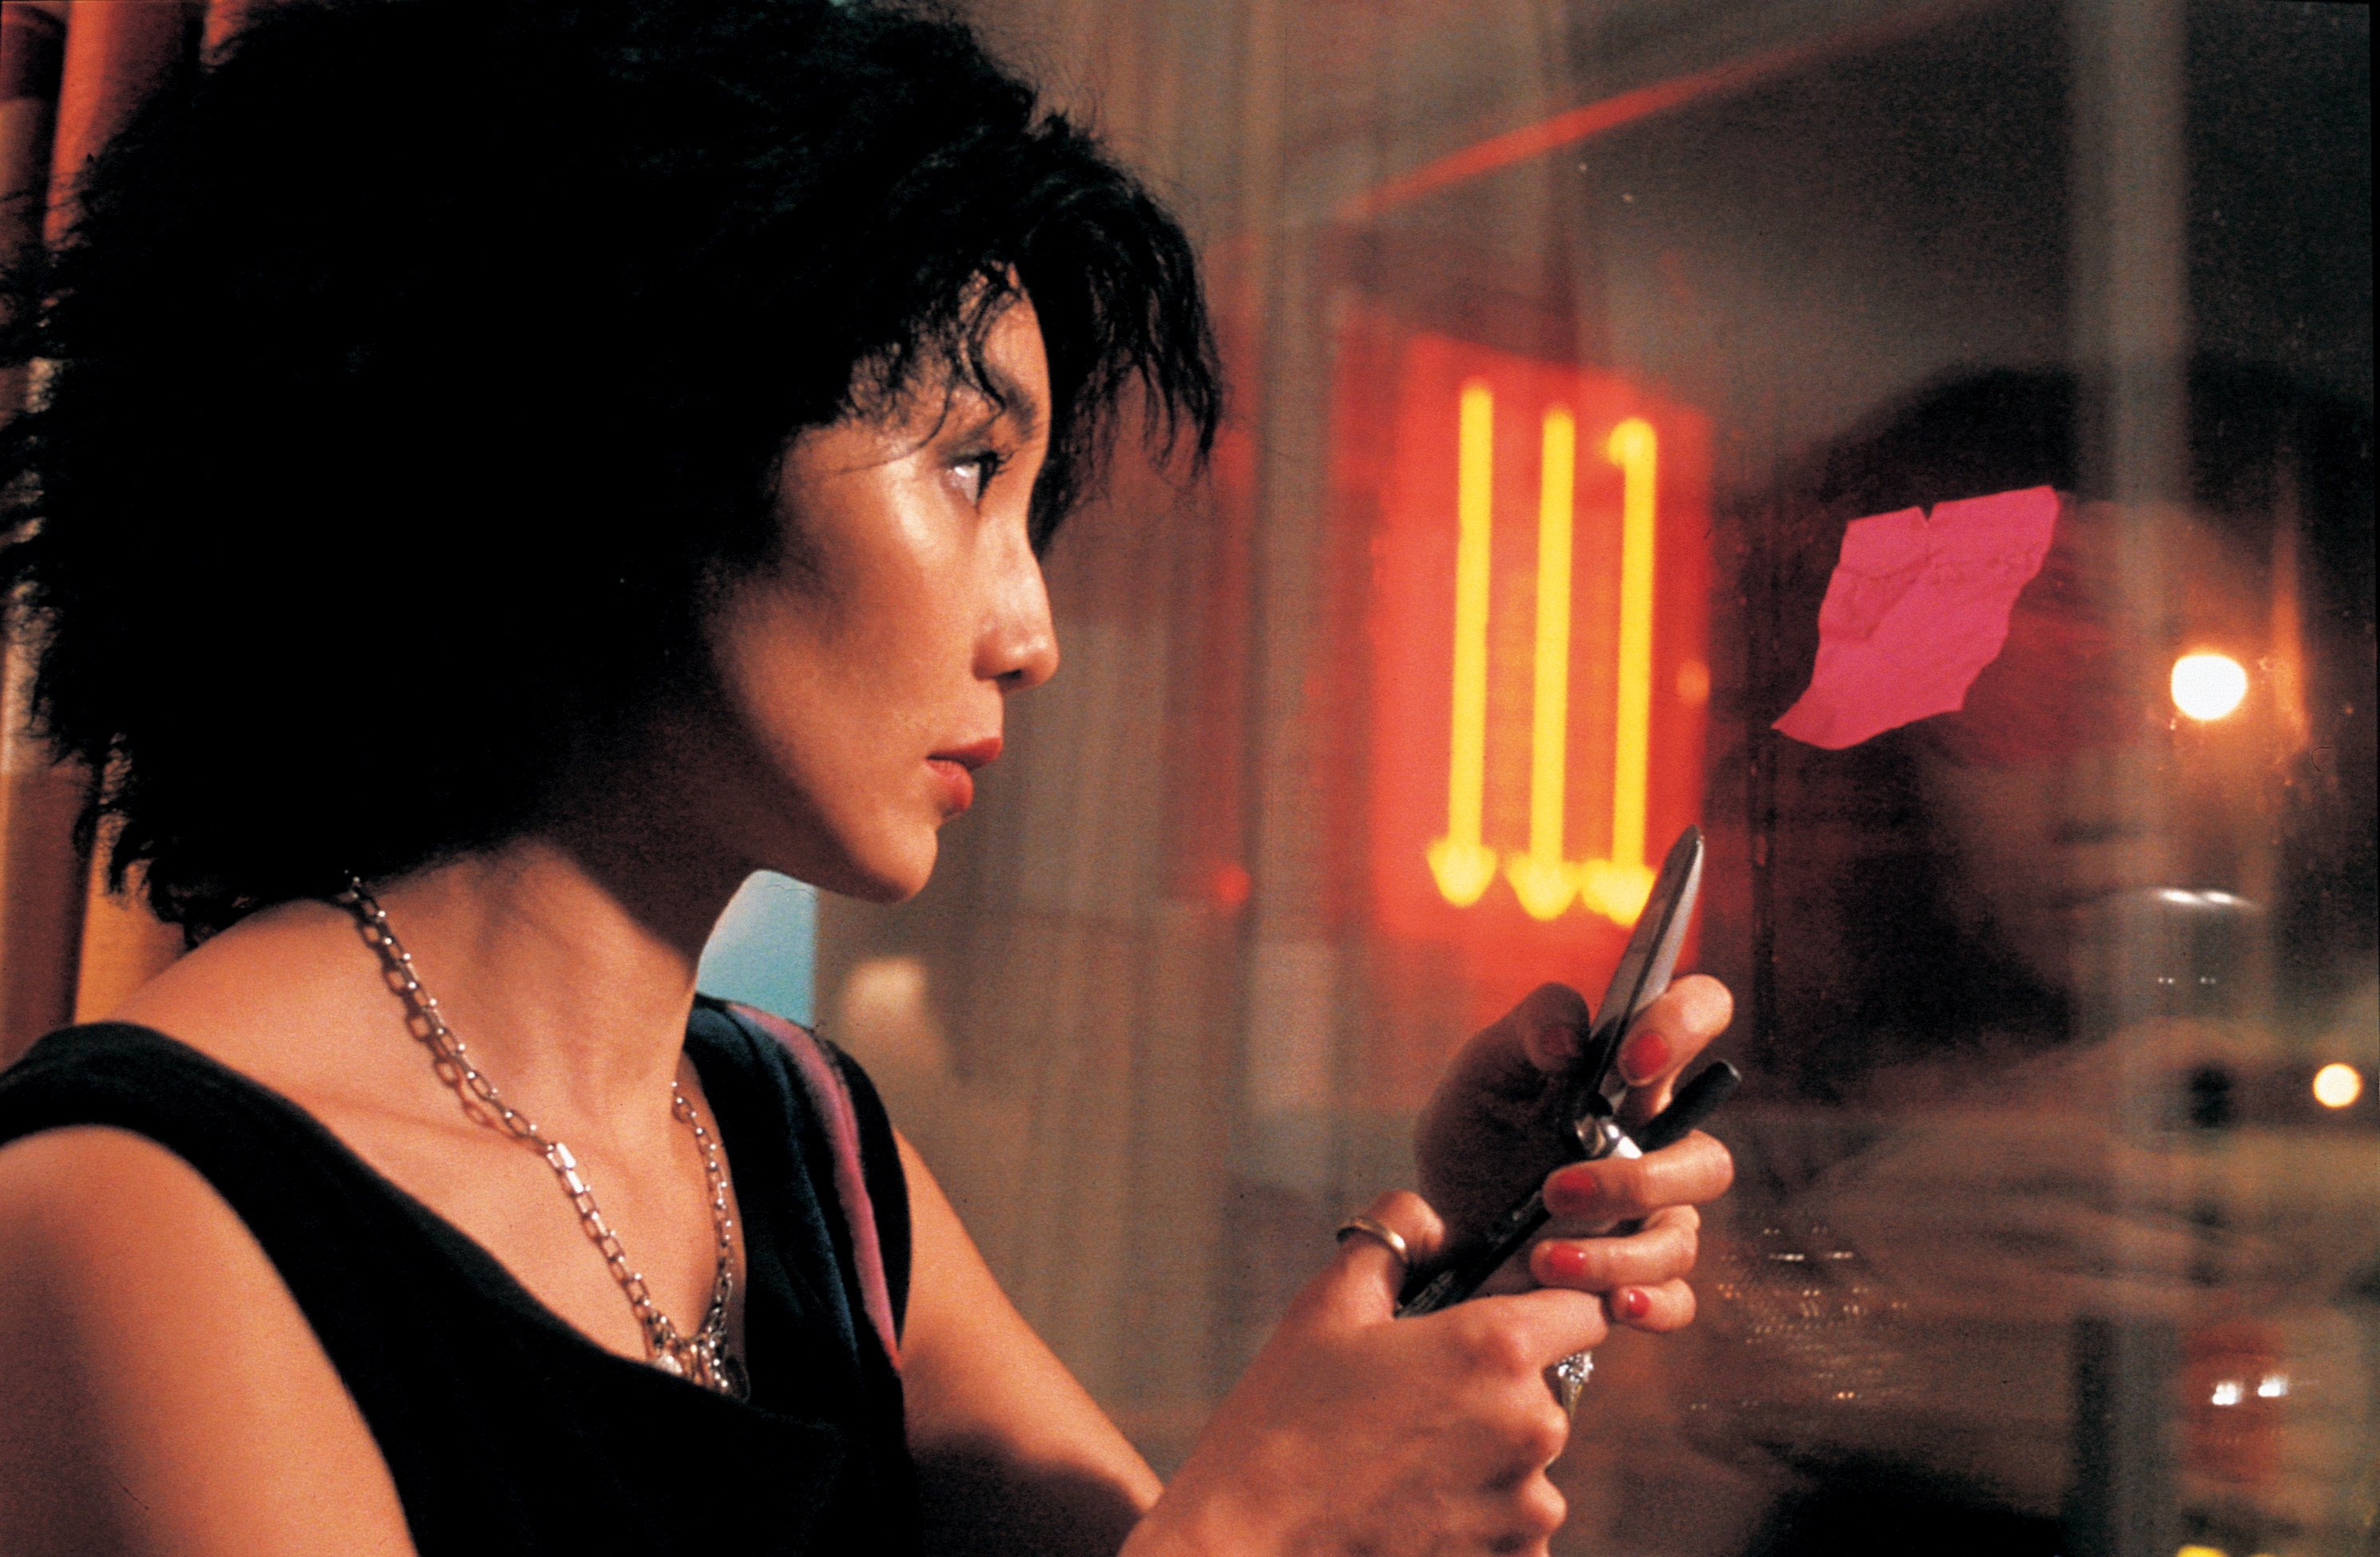 Maggie Cheung in a still from “Clean” (2004).